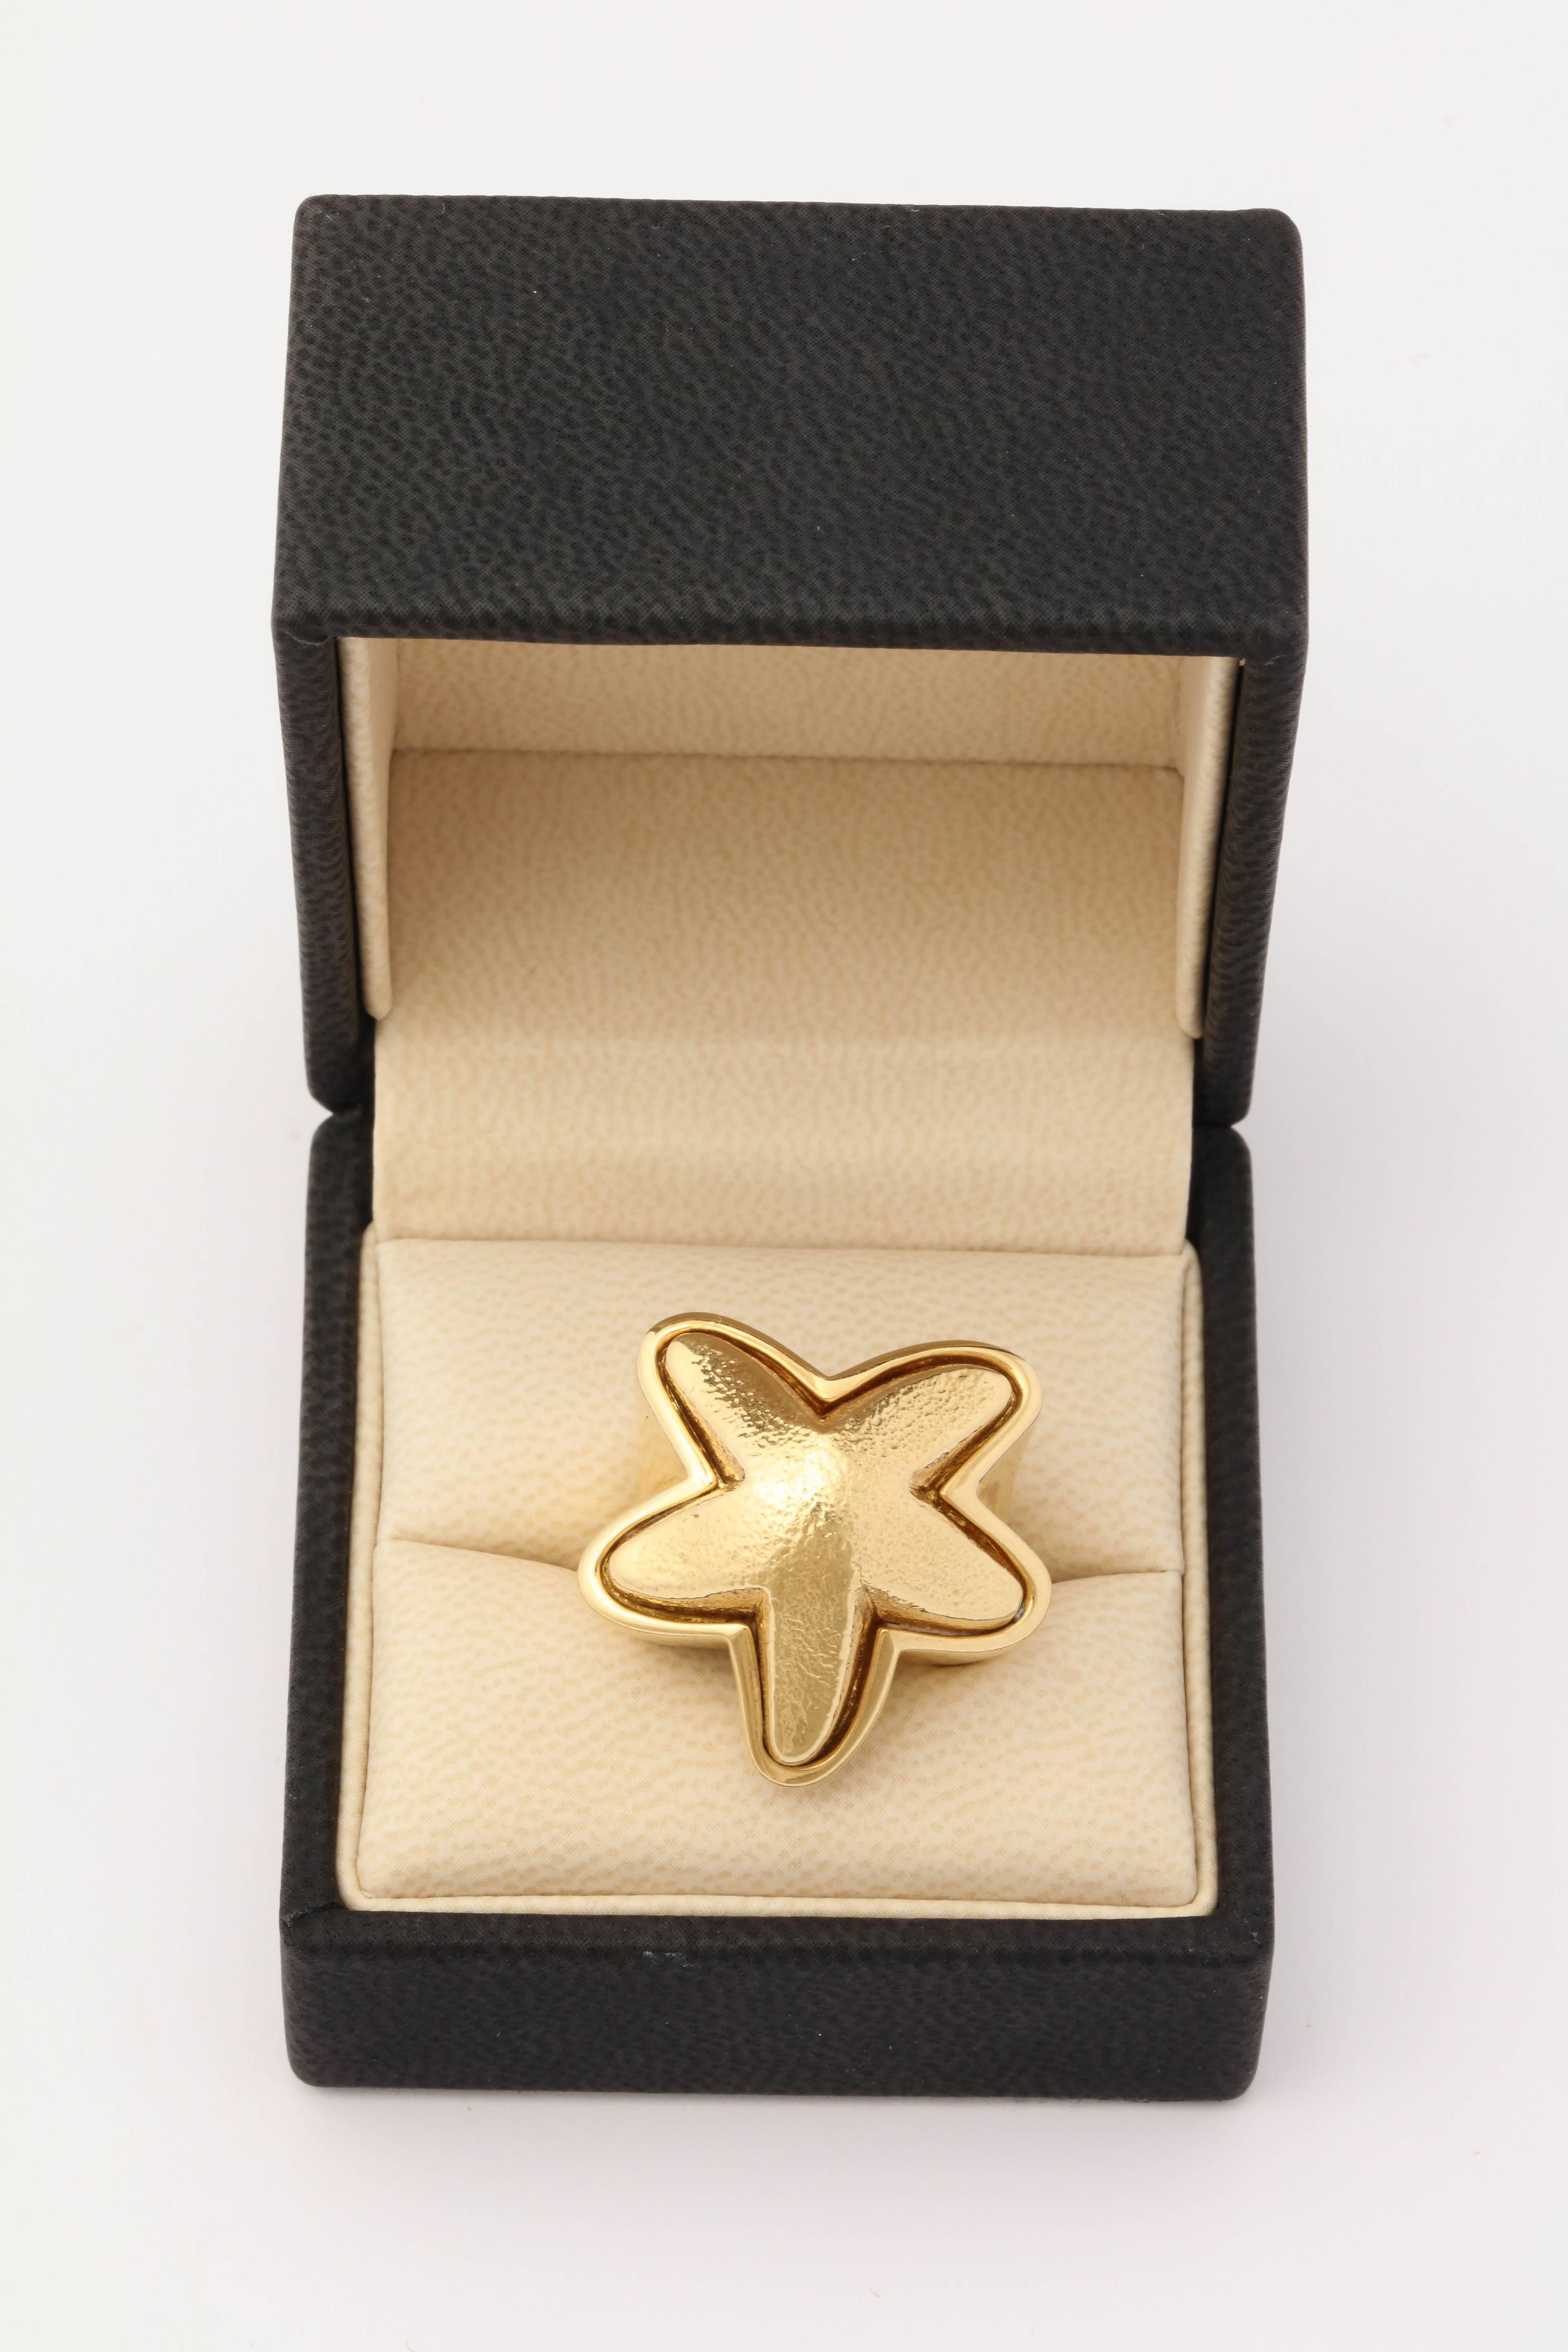 One Artisan Crafted Large Figural 18kt Yellow Gold Asymmetrical Starfish Ring With Mixed Textured Gold Design. The Starfish Itself Is Created With Hand Hammered Textured Gold Craftmanship And The Rest Of The Piece Is Made In 18kt High Polish Gold